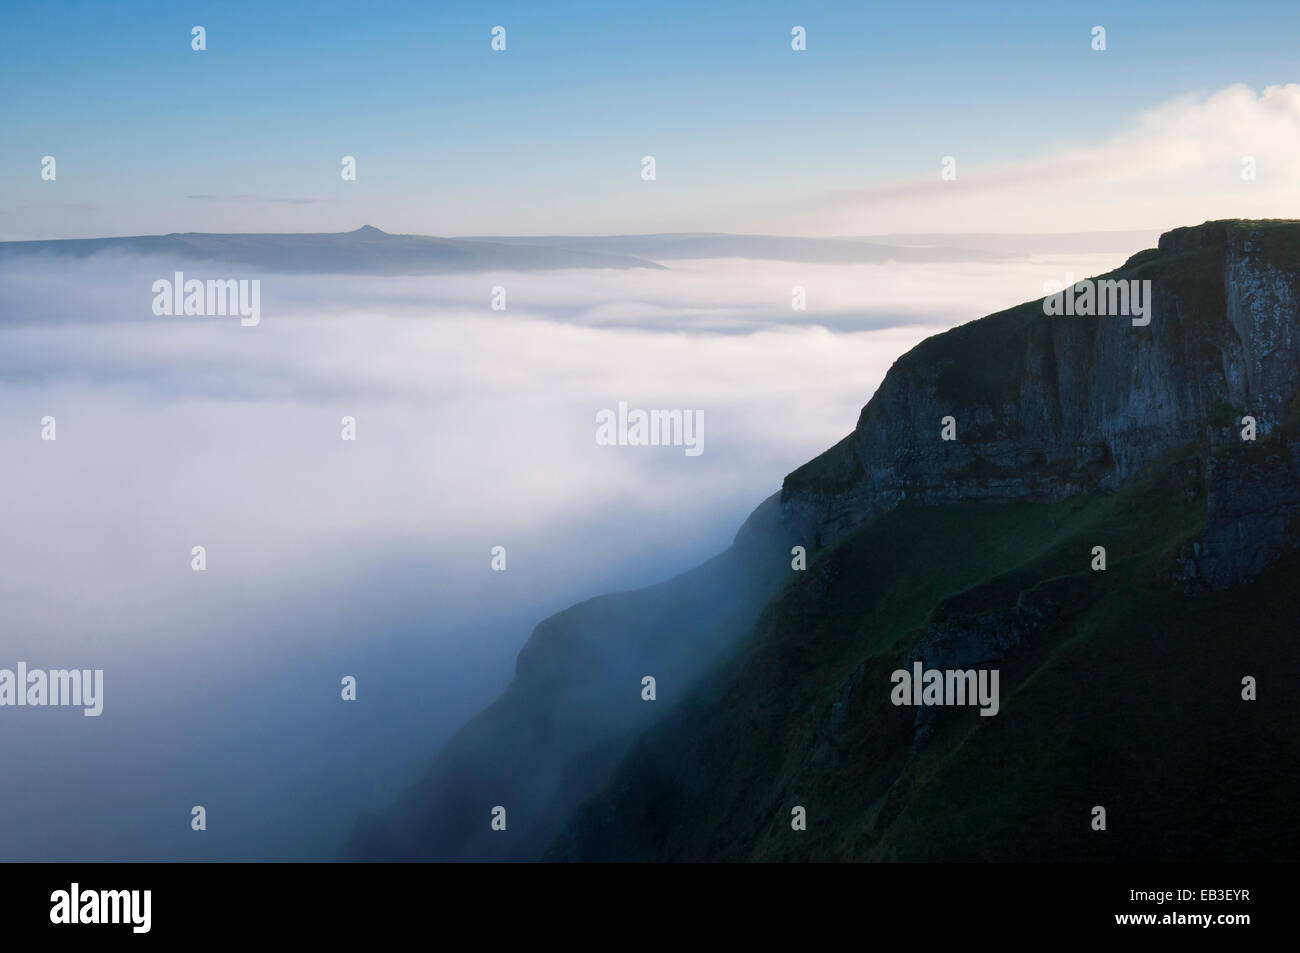 Dreamlike mist drifting around Winnats Pass in the Peak District, Derbyshire. View to Win Hill in the distance. Stock Photo